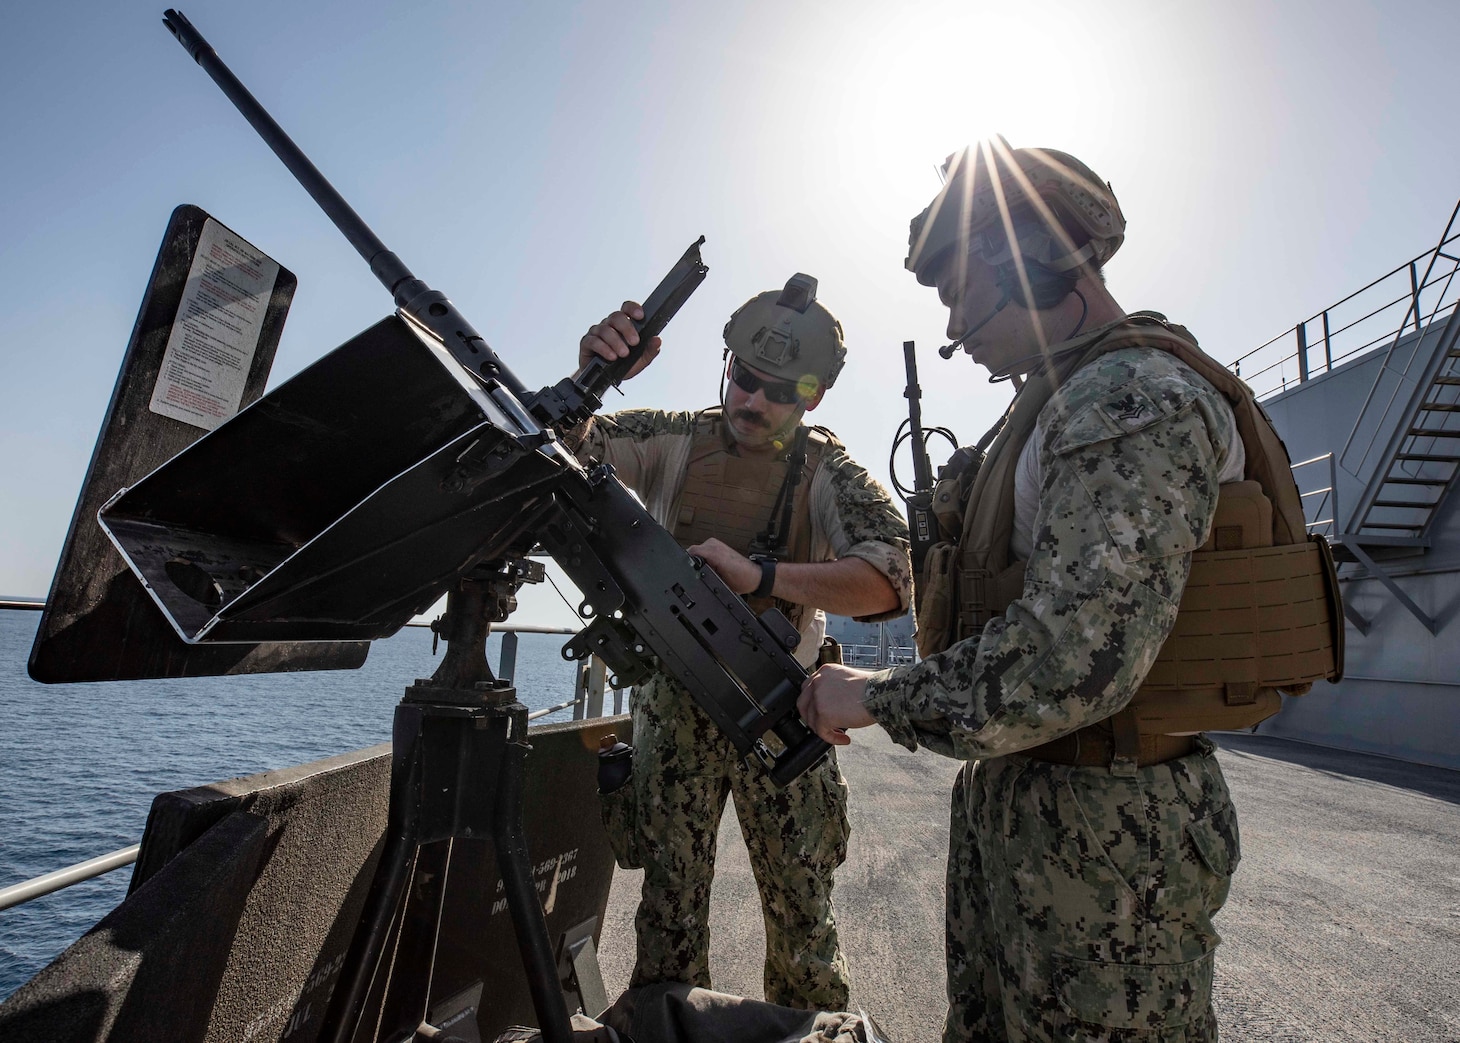 (June 5, 2022) Hospital Corpsman 1st Class Giovanne Farias, left, from Dallas, and Machinist's Mate 2nd Class Bryant Neri, from Temecula, California, conduct a safety check on a .50-caliber machine gun on the Lewis B. Puller-class expeditionary sea base USS Hershel "Woody" Williams (ESB 4) while entering port at Naval Support Activity Souda Bay, Greece, June 5, 2022. Hershel “Woody” Williams is rotationally deployed to the U.S. Naval Forces Africa area of operations, employed by U.S. Sixth Fleet, to defend U.S., allied and partner interests.